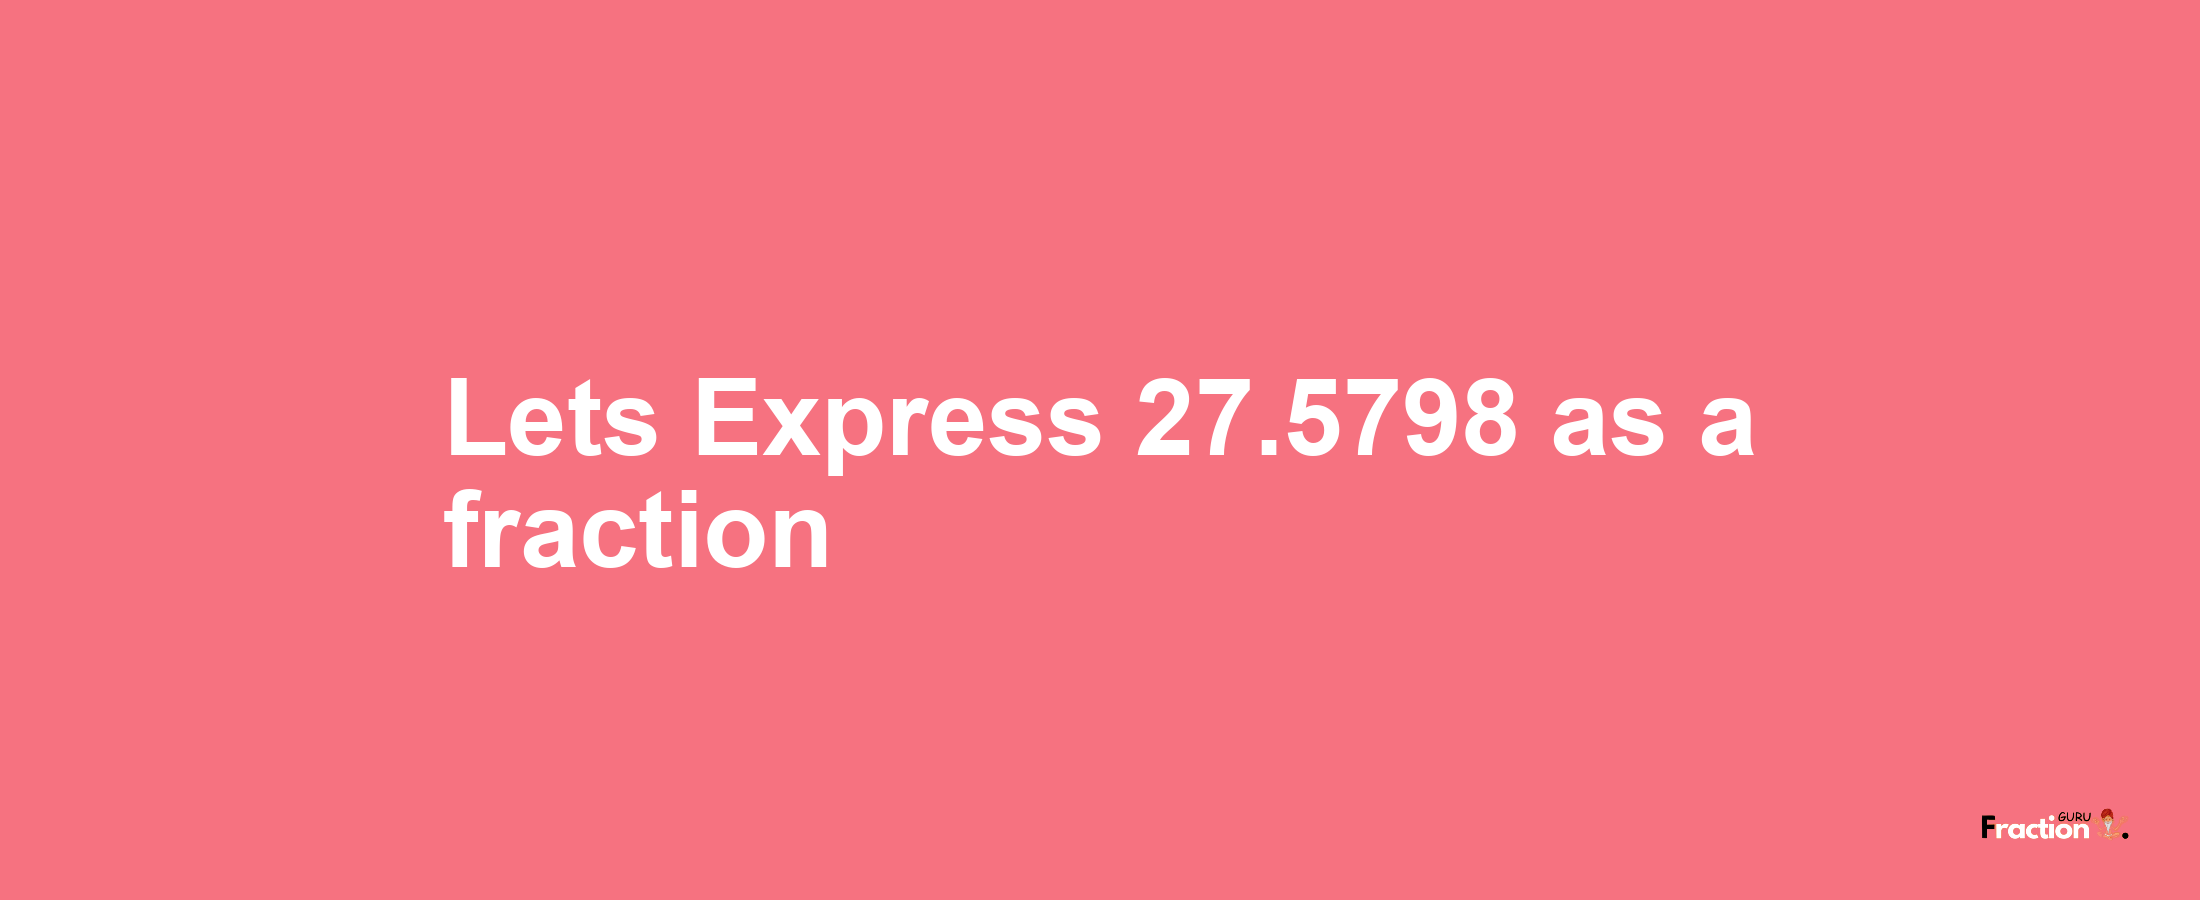 Lets Express 27.5798 as afraction